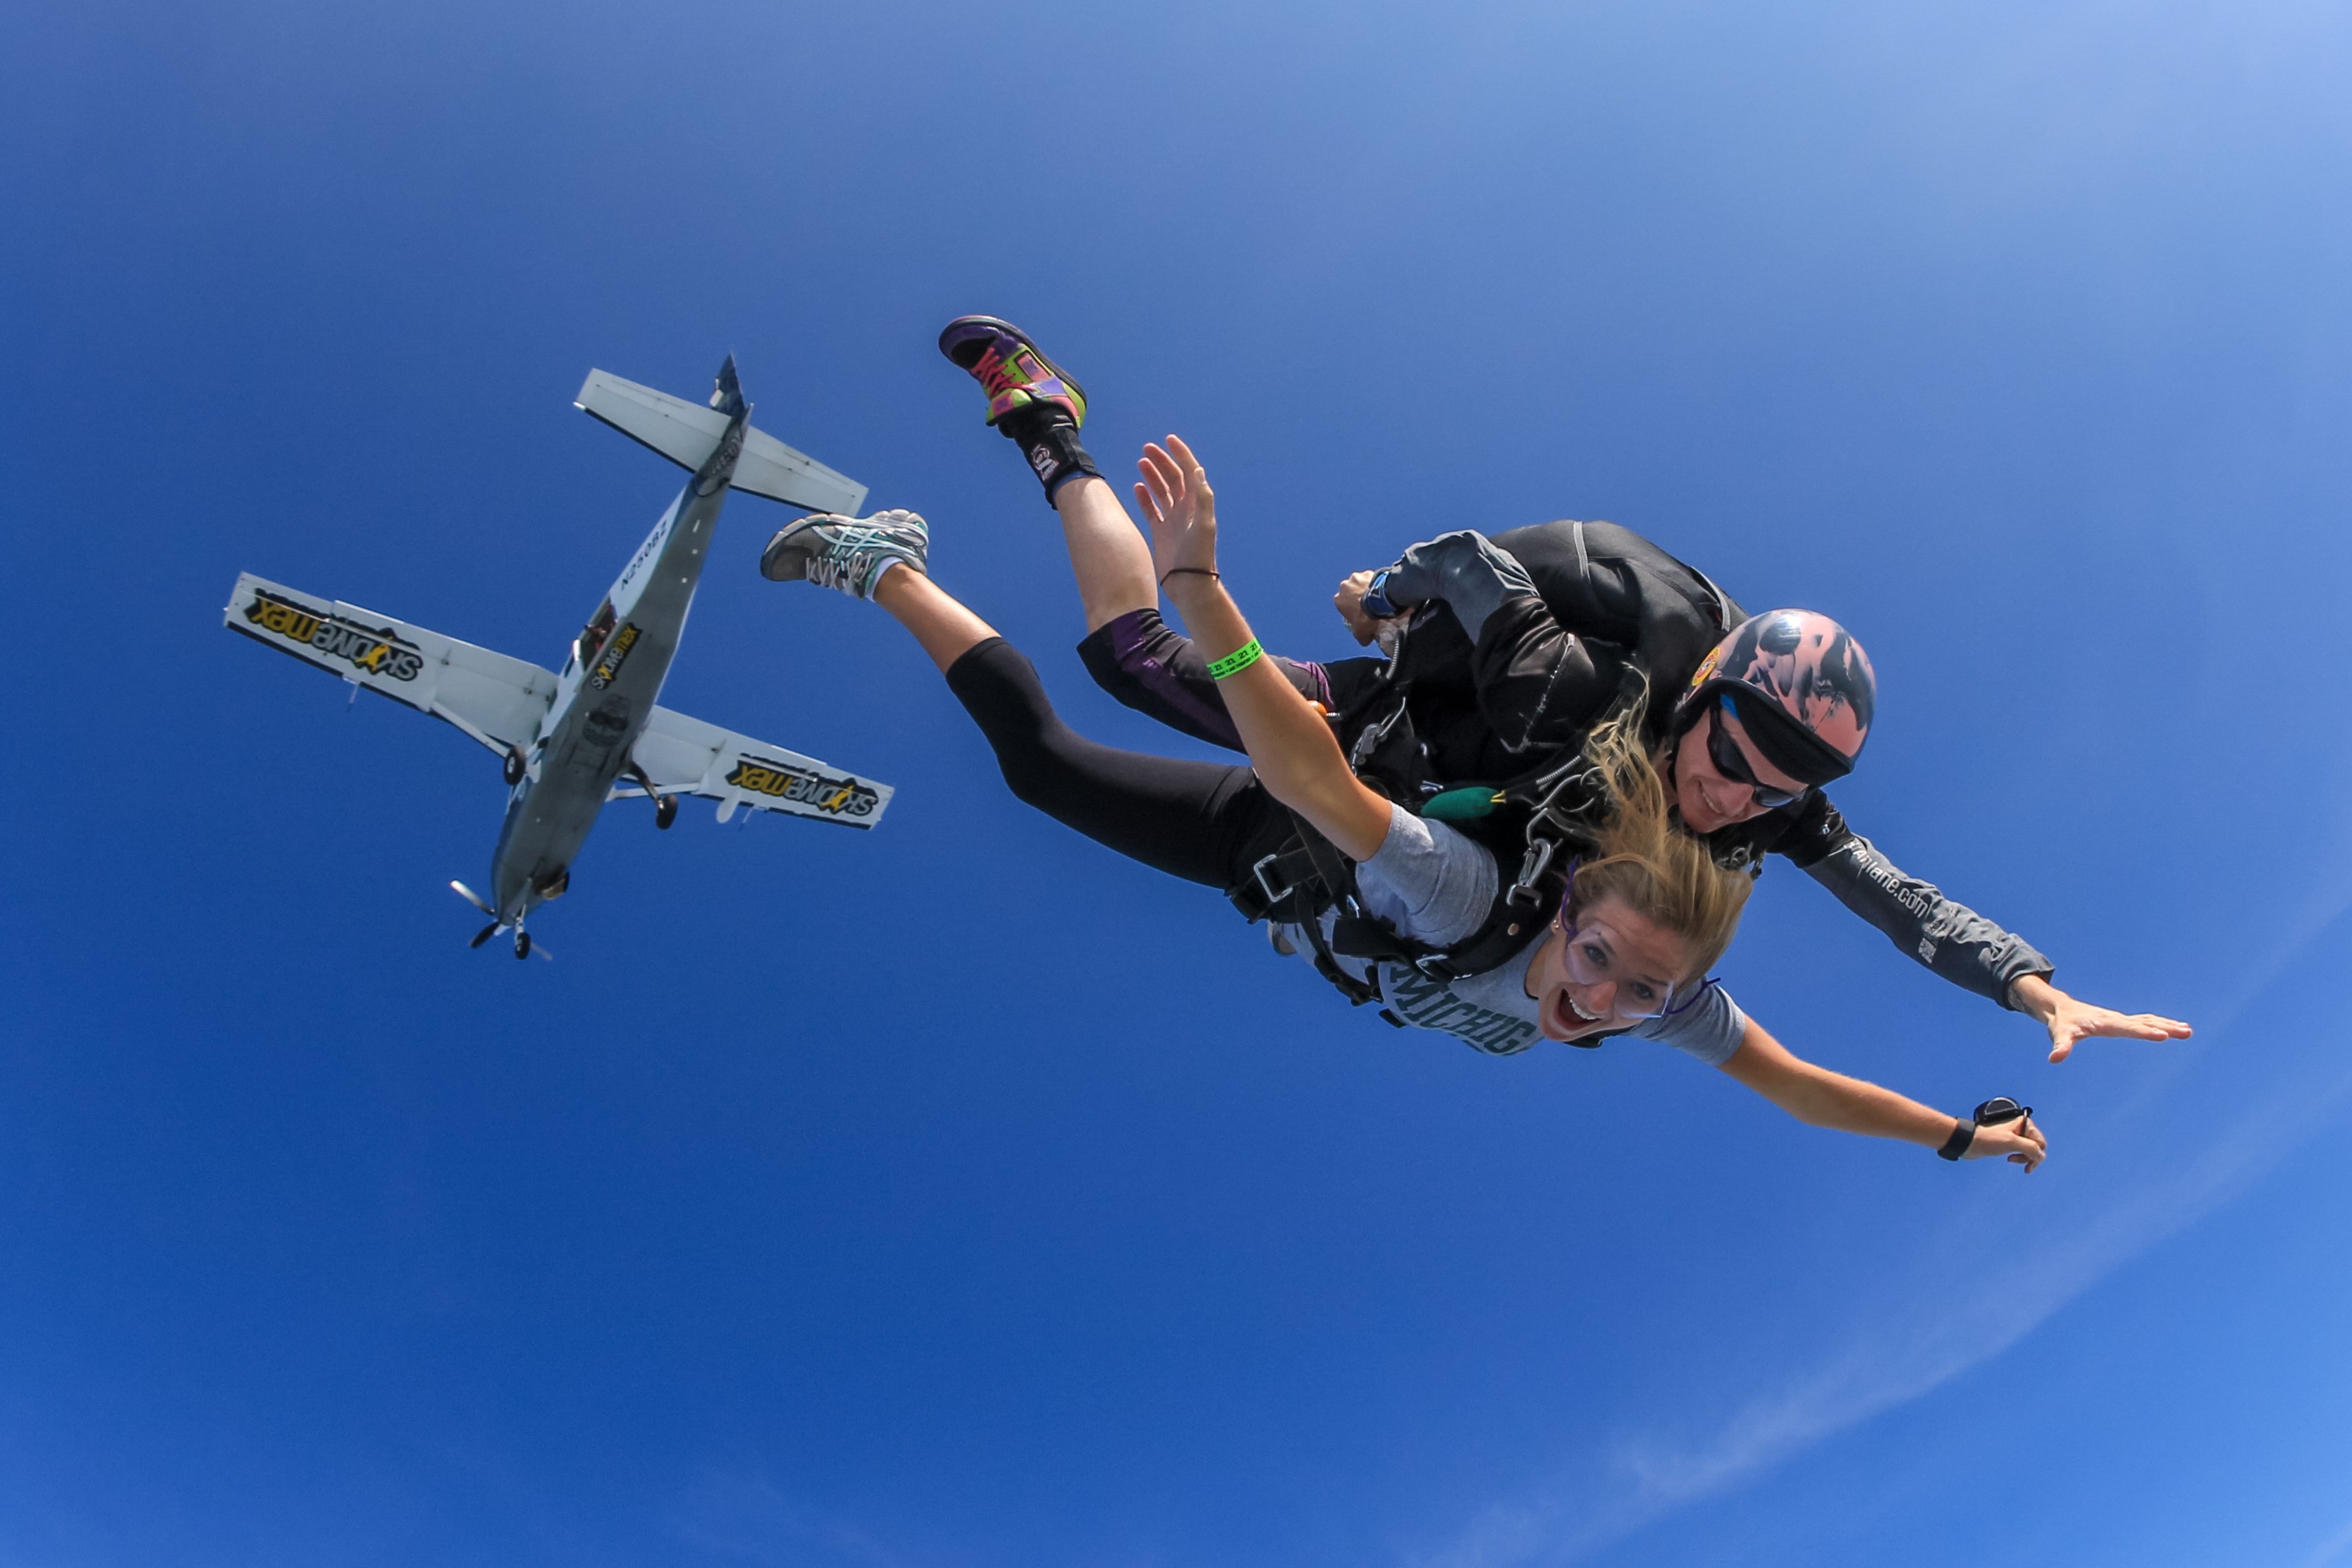 Tandem Skydiving Explained What is a Tandem Jump?